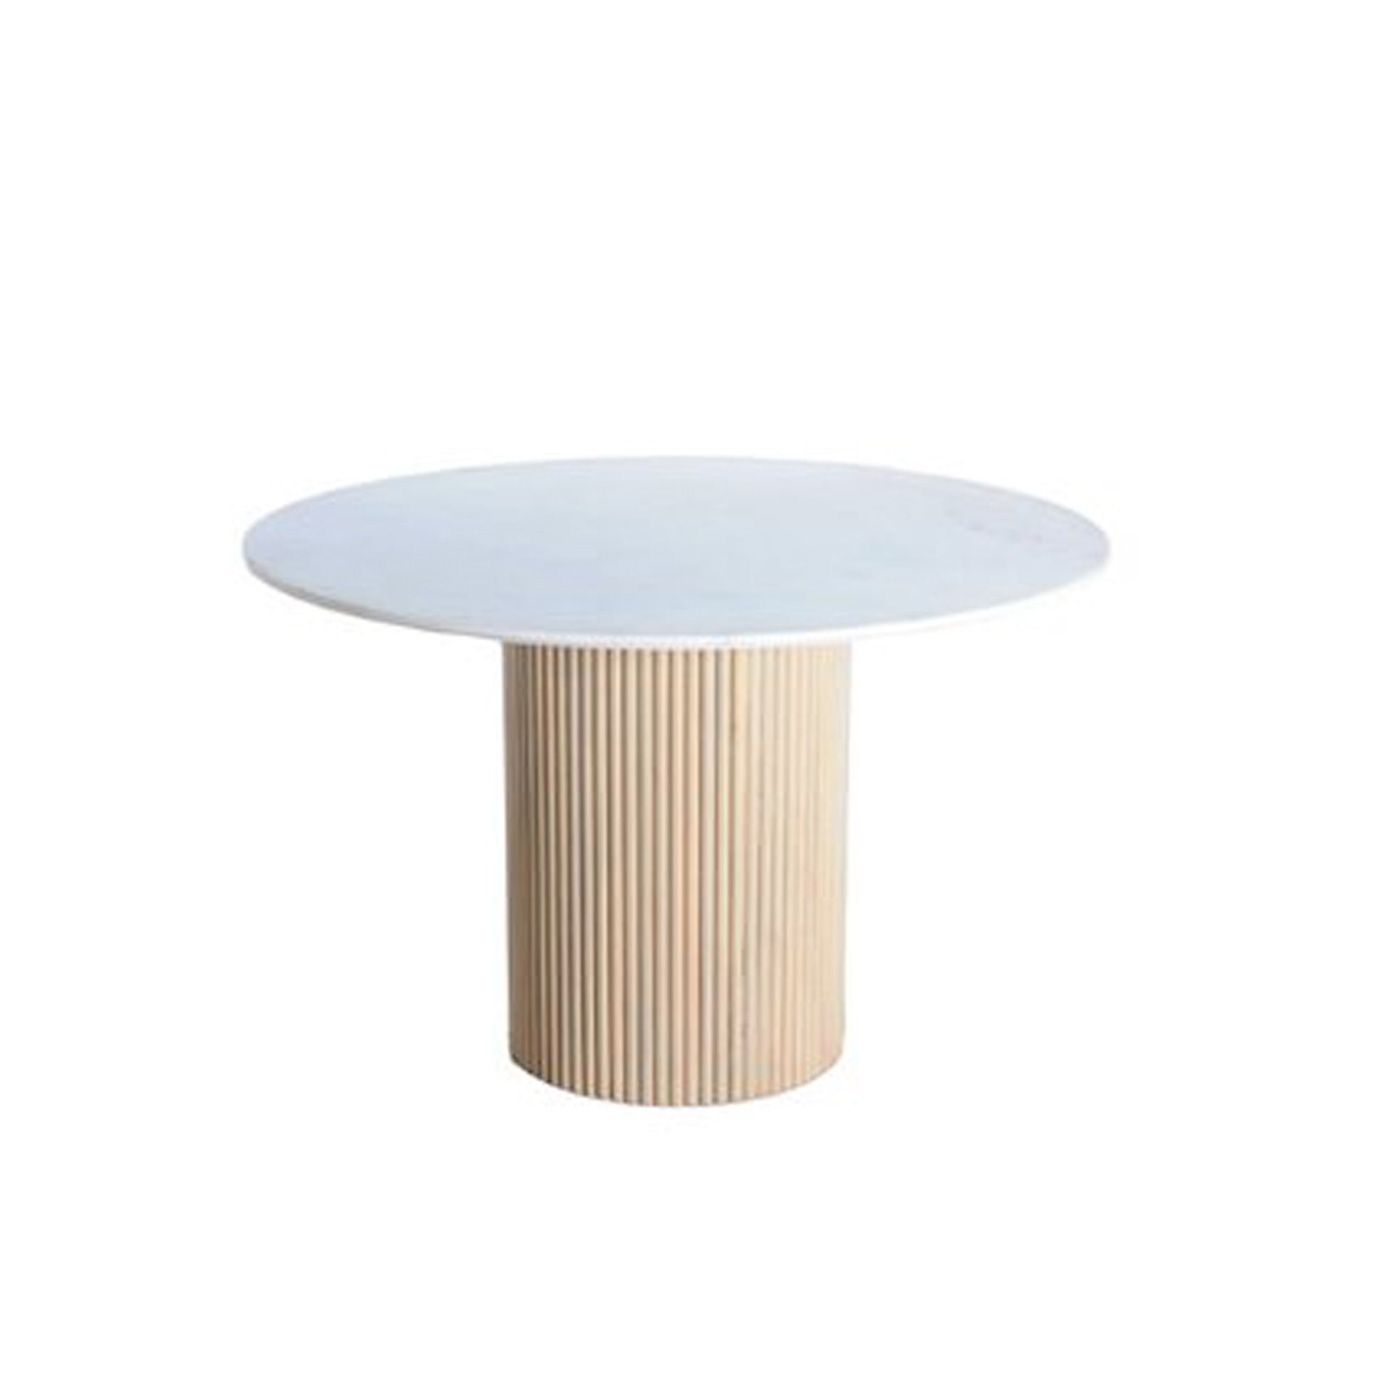 Round Dining Tables In Norwich - 100's More Tables Online